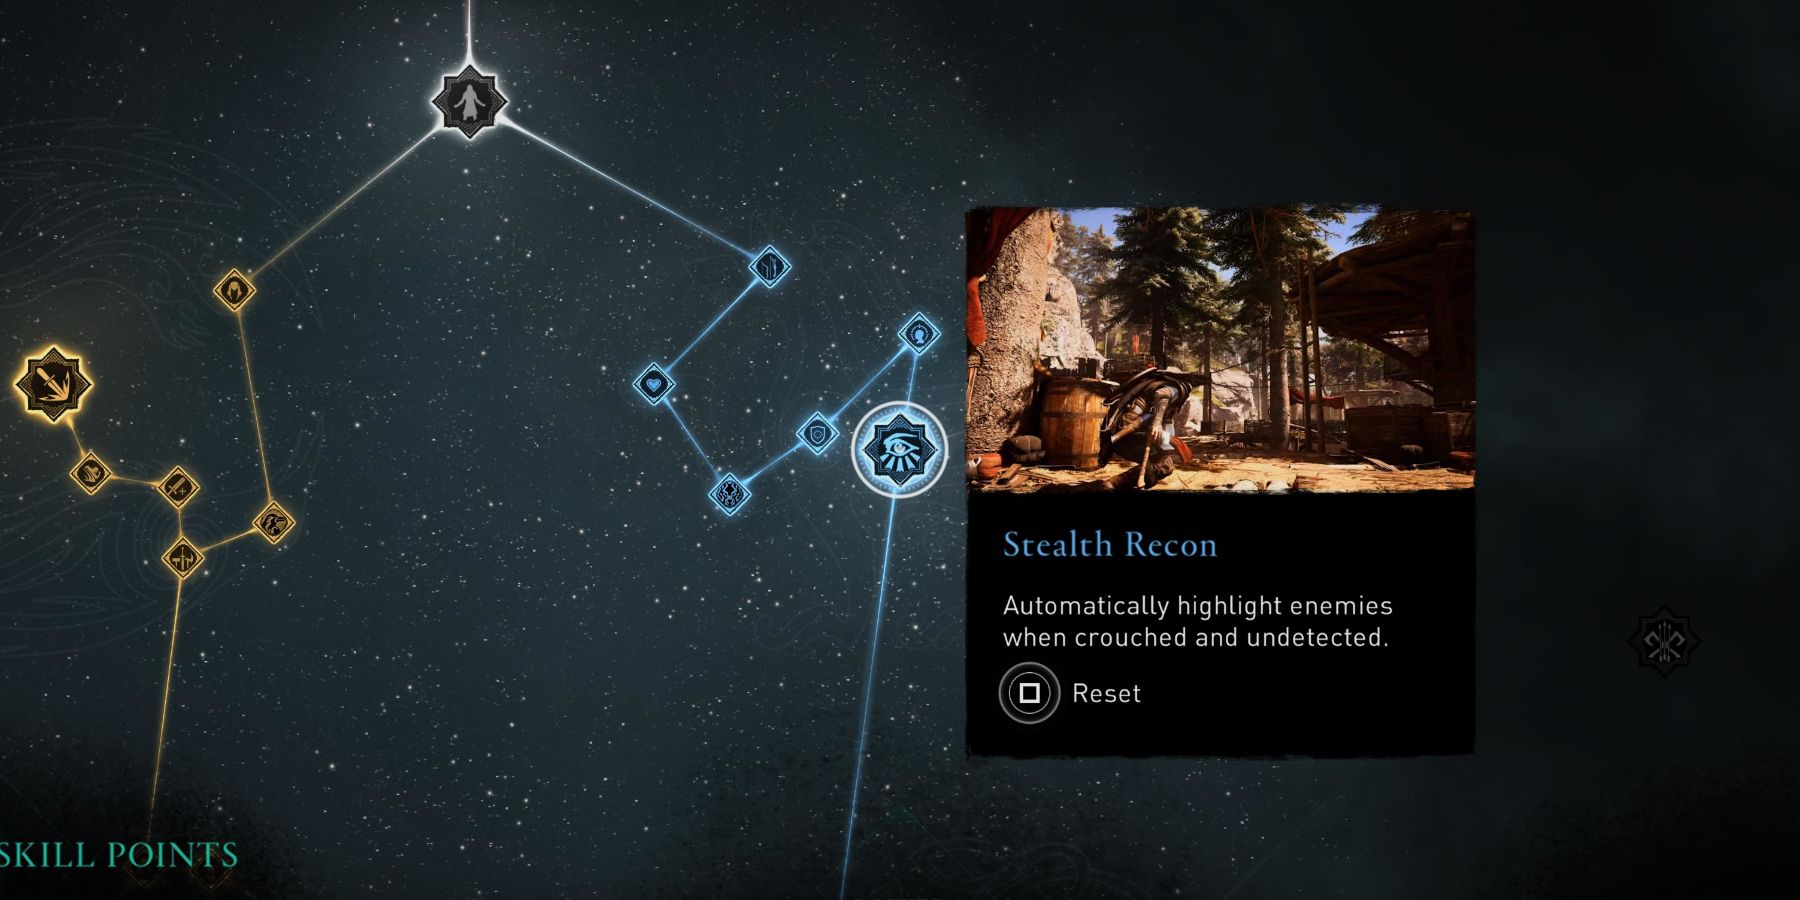 Assassin's Creed Valhalla - stealth recon on the skill tree